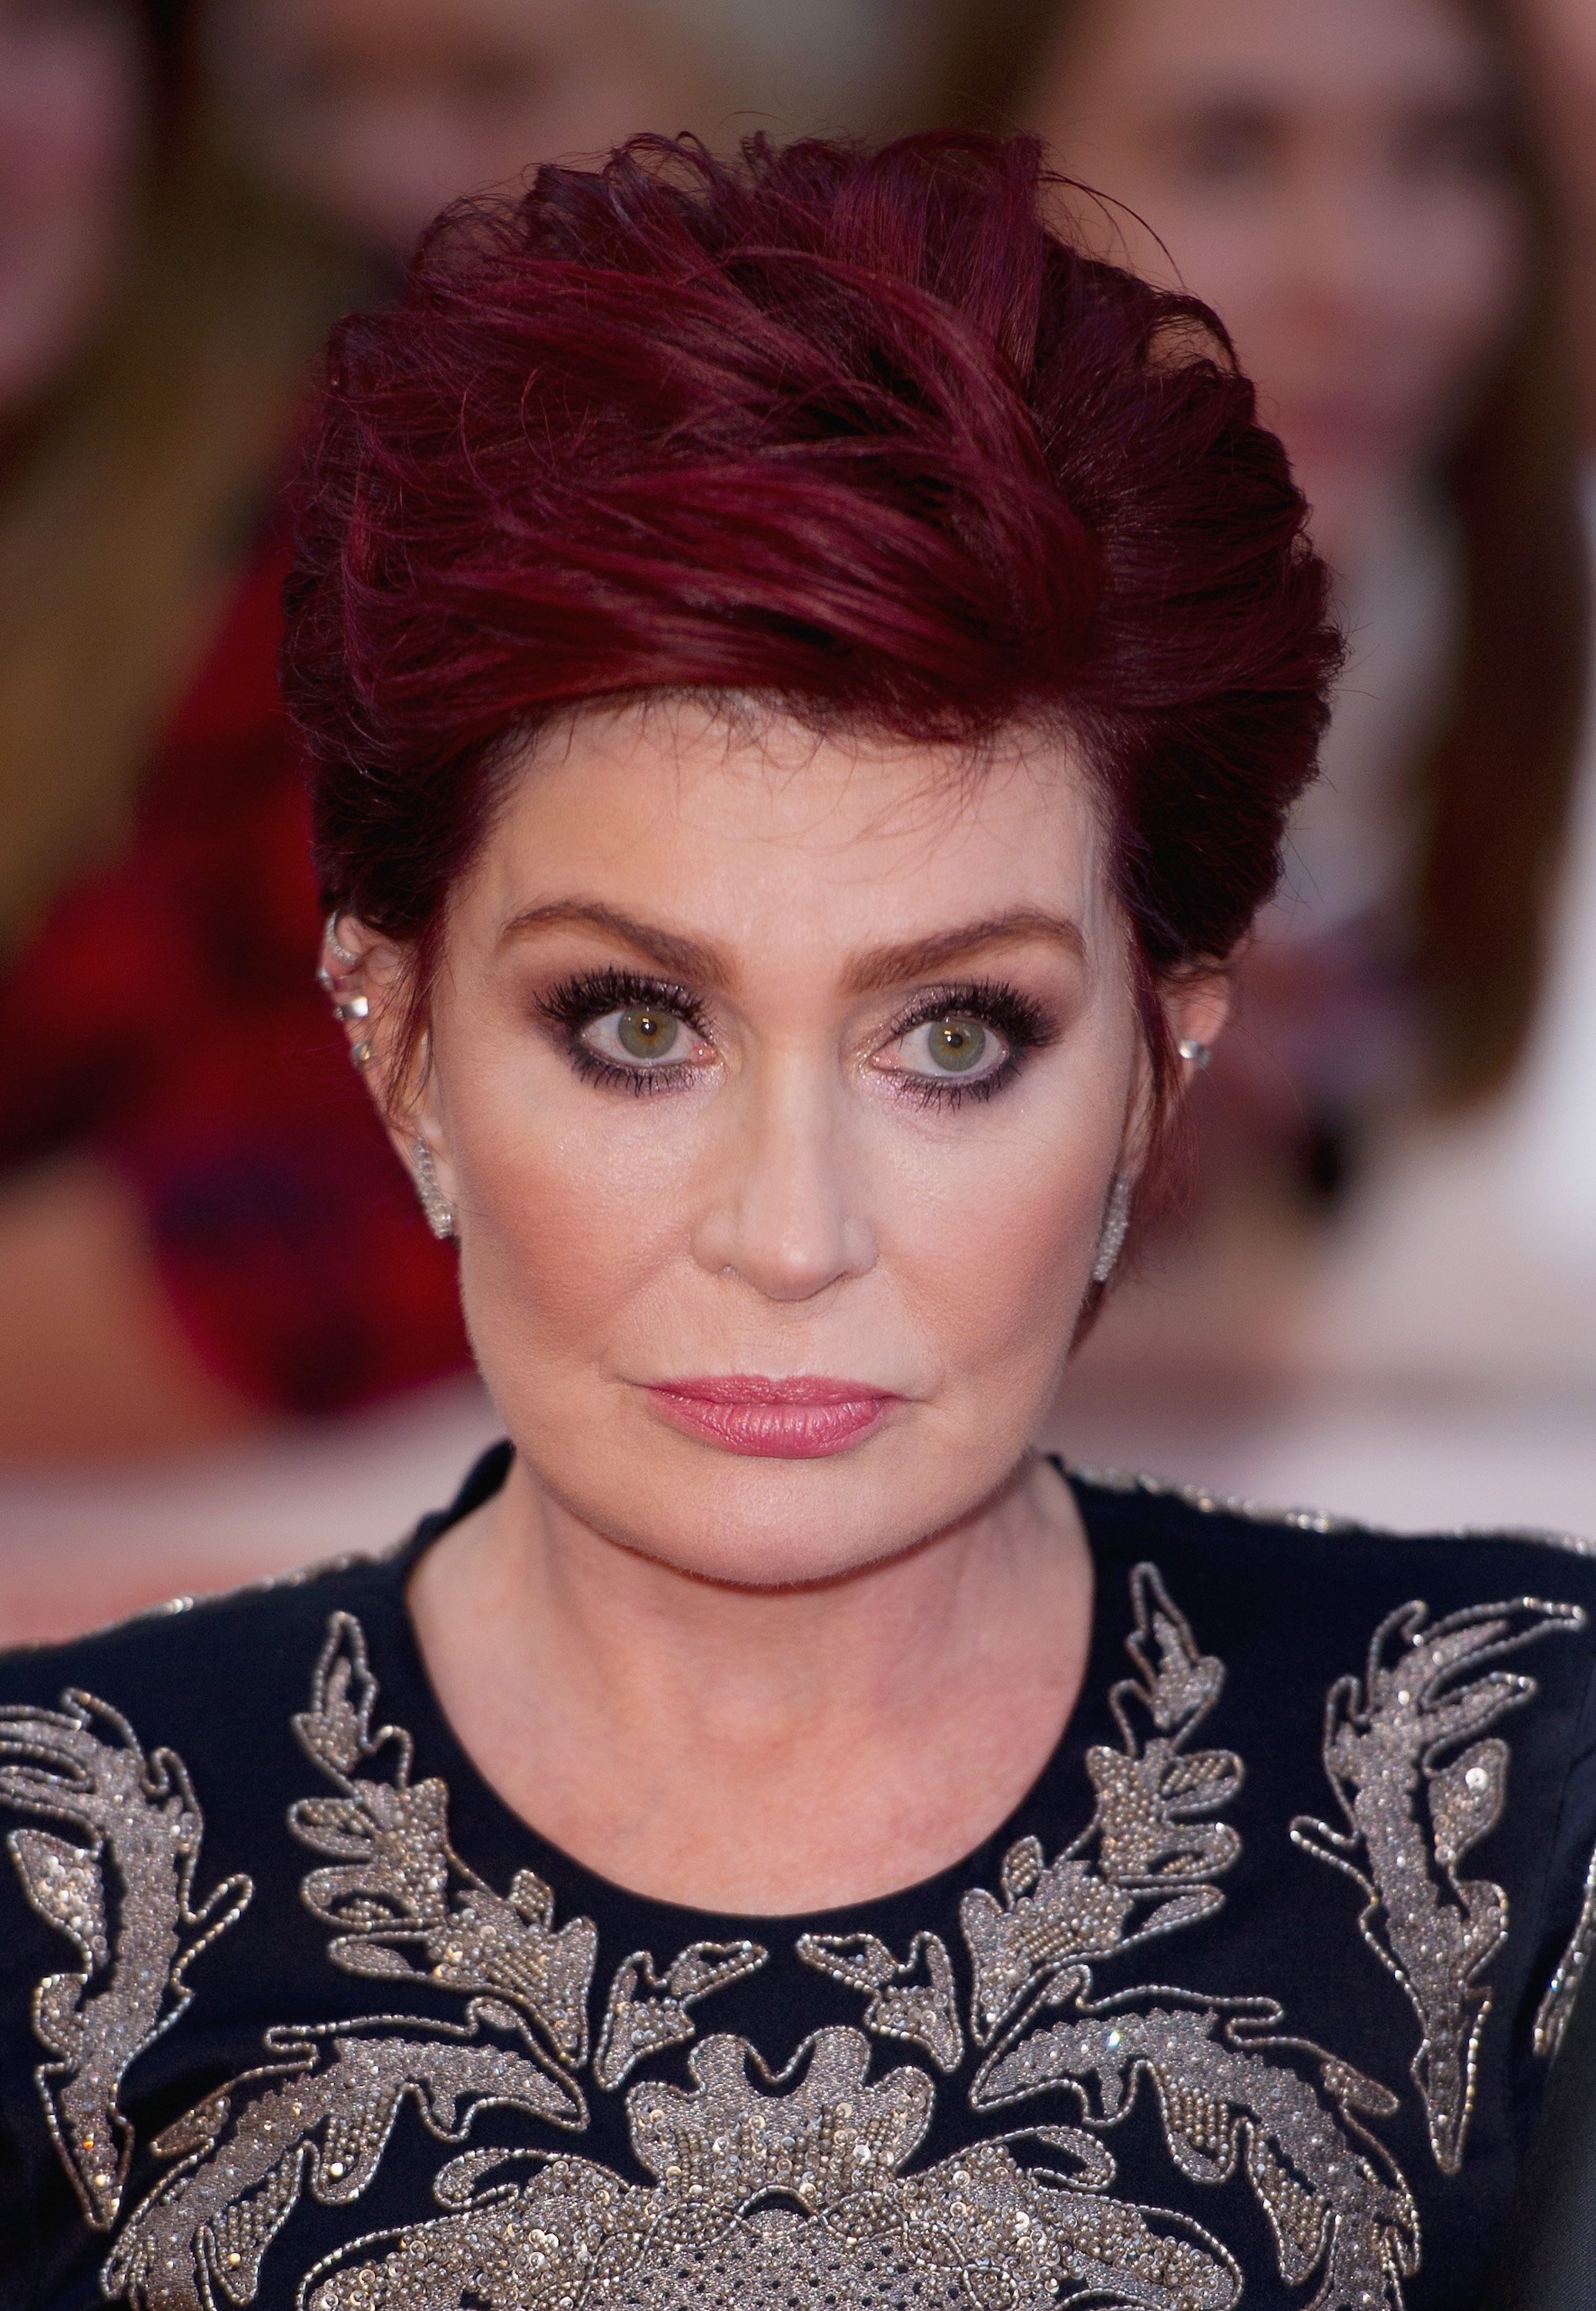 Sharon Osbourne at the Pride of Britain awards at The Grosvenor House Hotel on September 28, 2015 in London, England | Photo: Getty Images